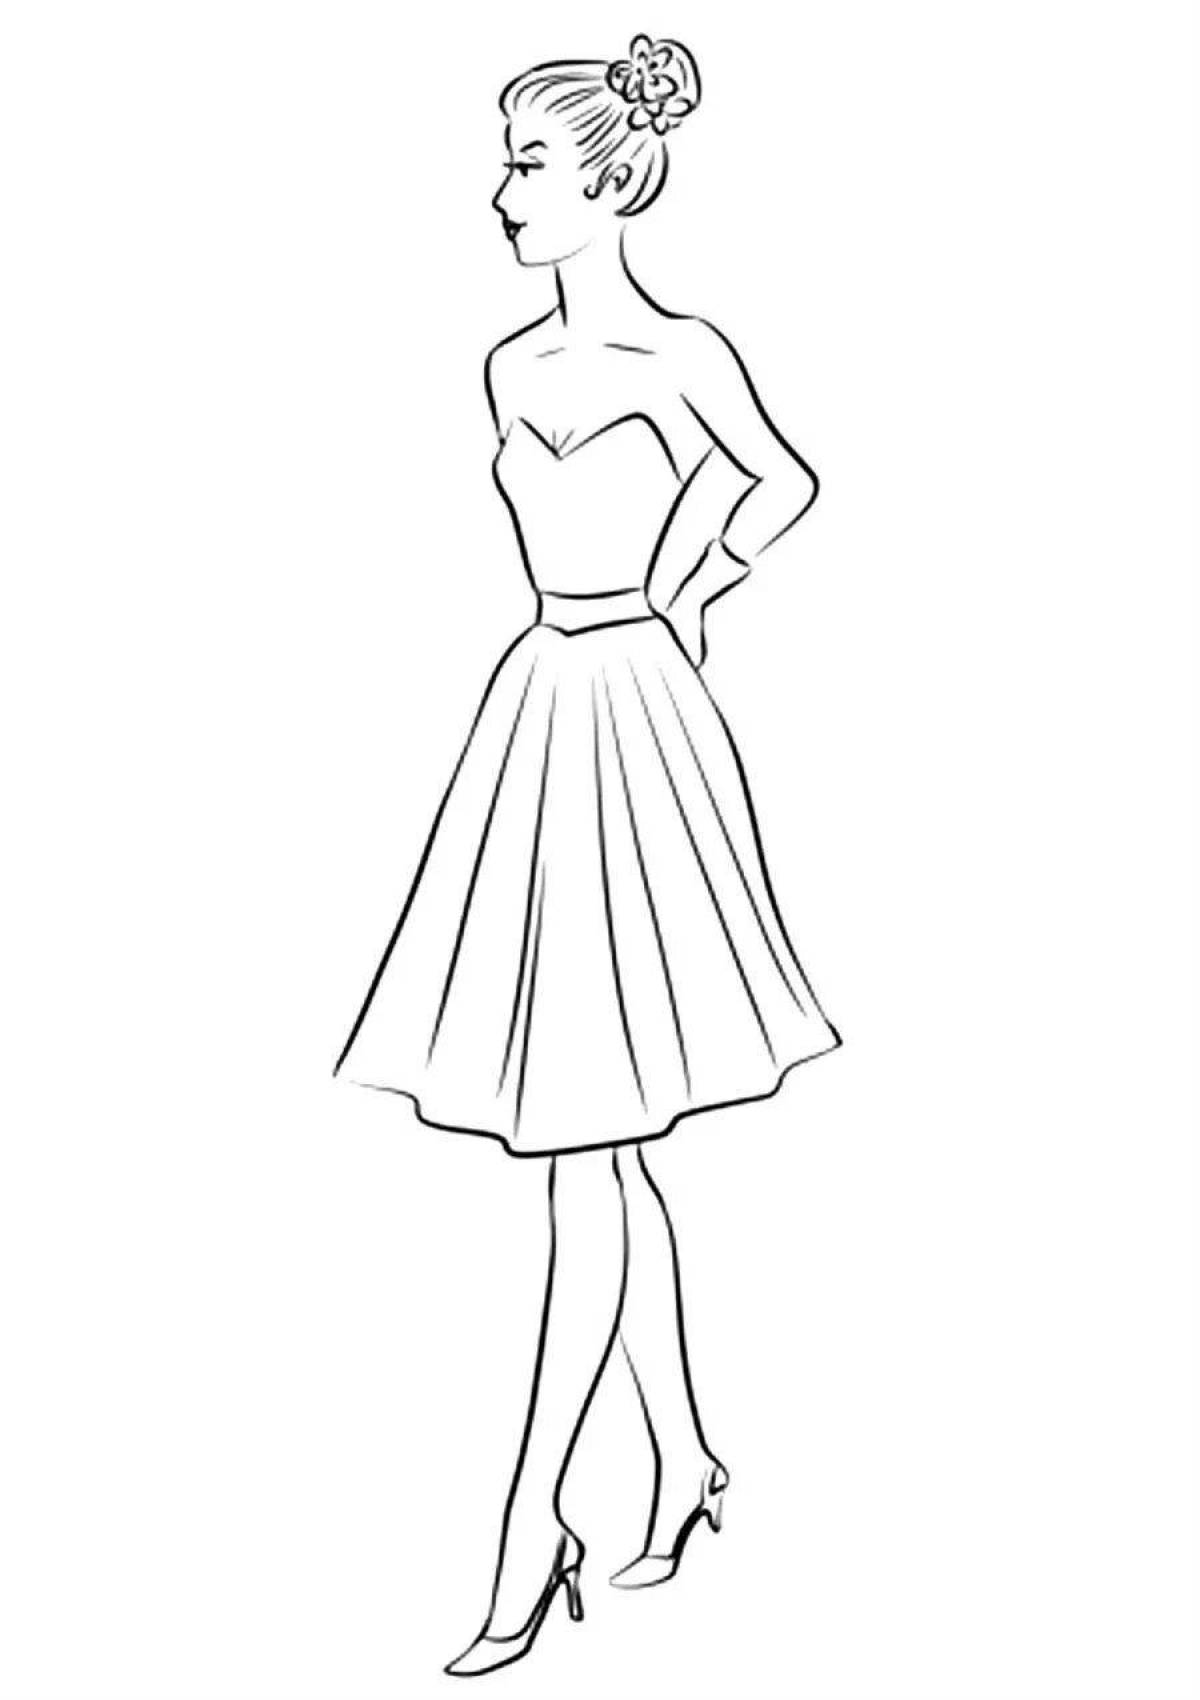 Gorgeous coloring book of a girl in a long dress